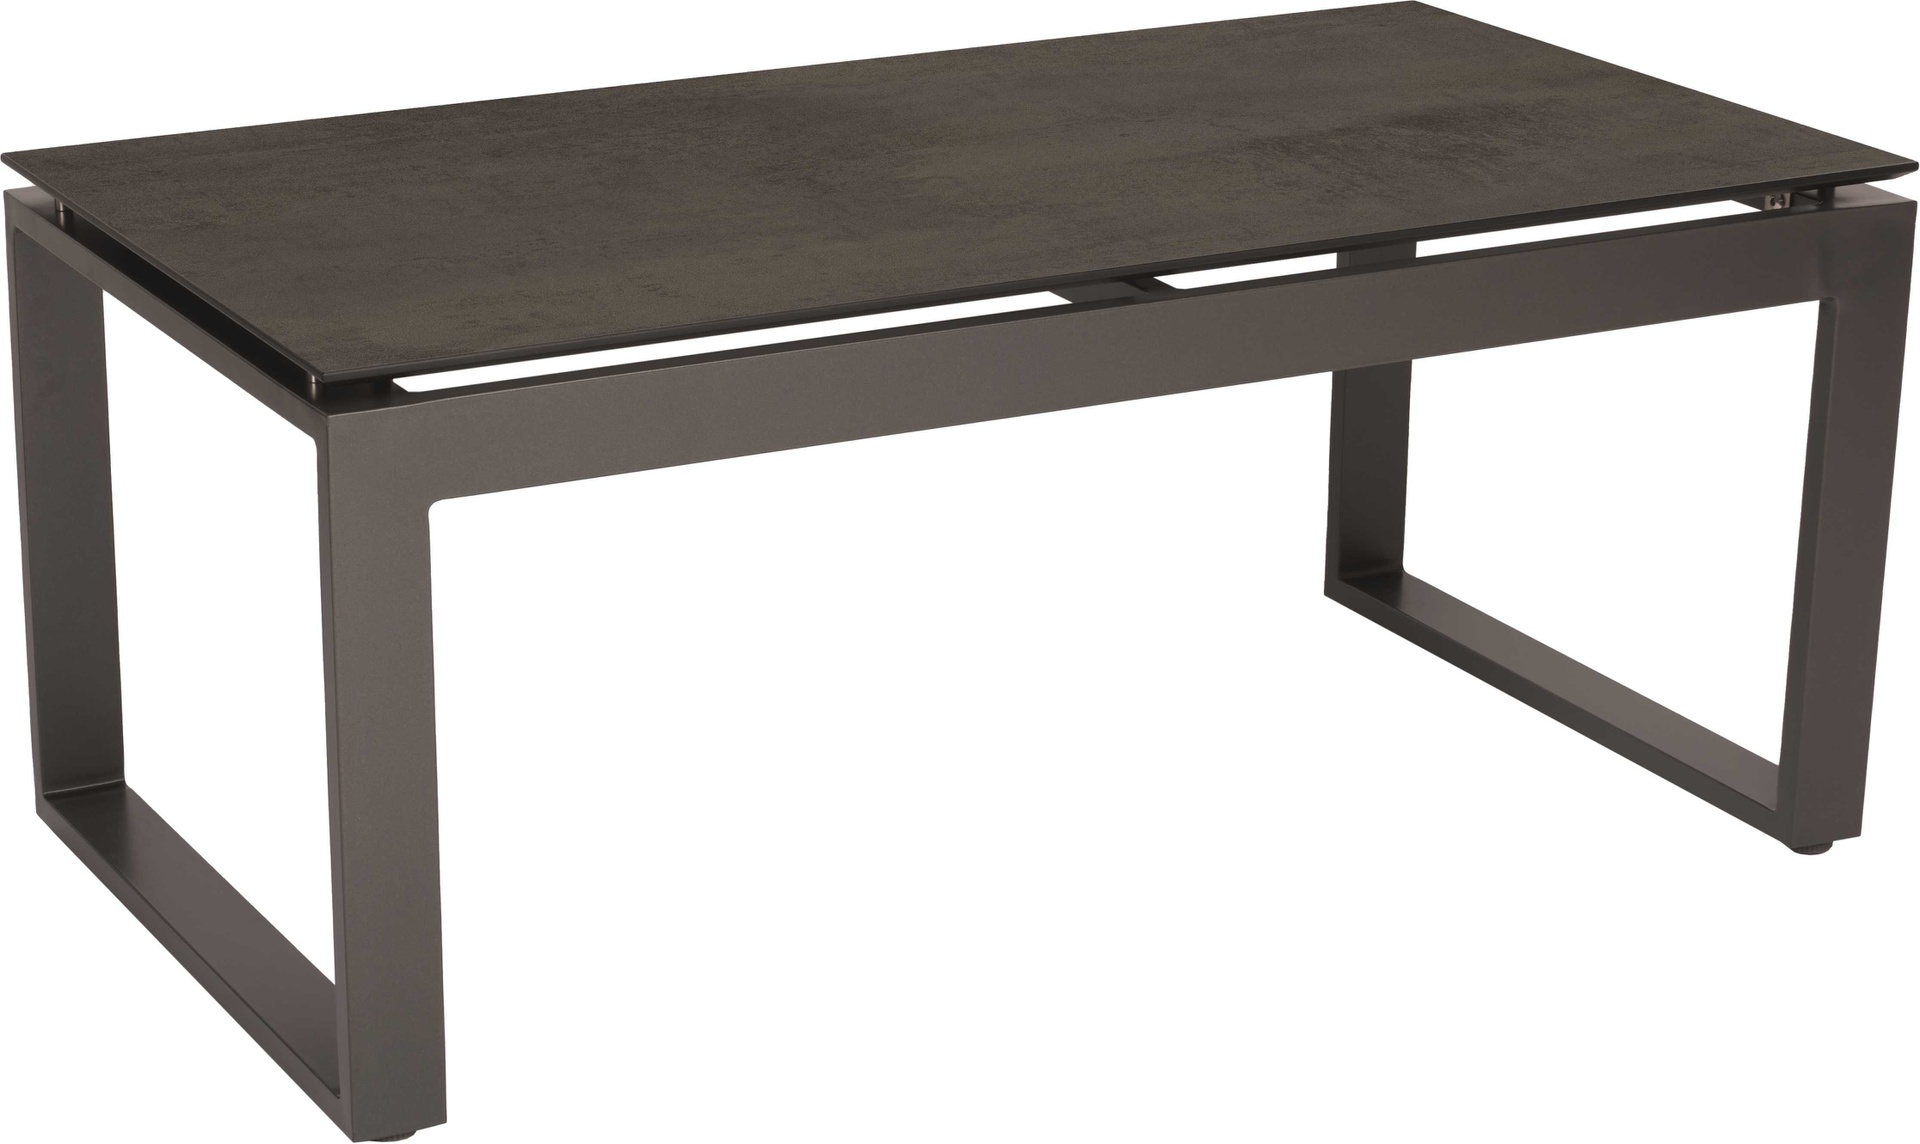 TABLE BASSE ALLROUND ANTHRACITE Slate STERN